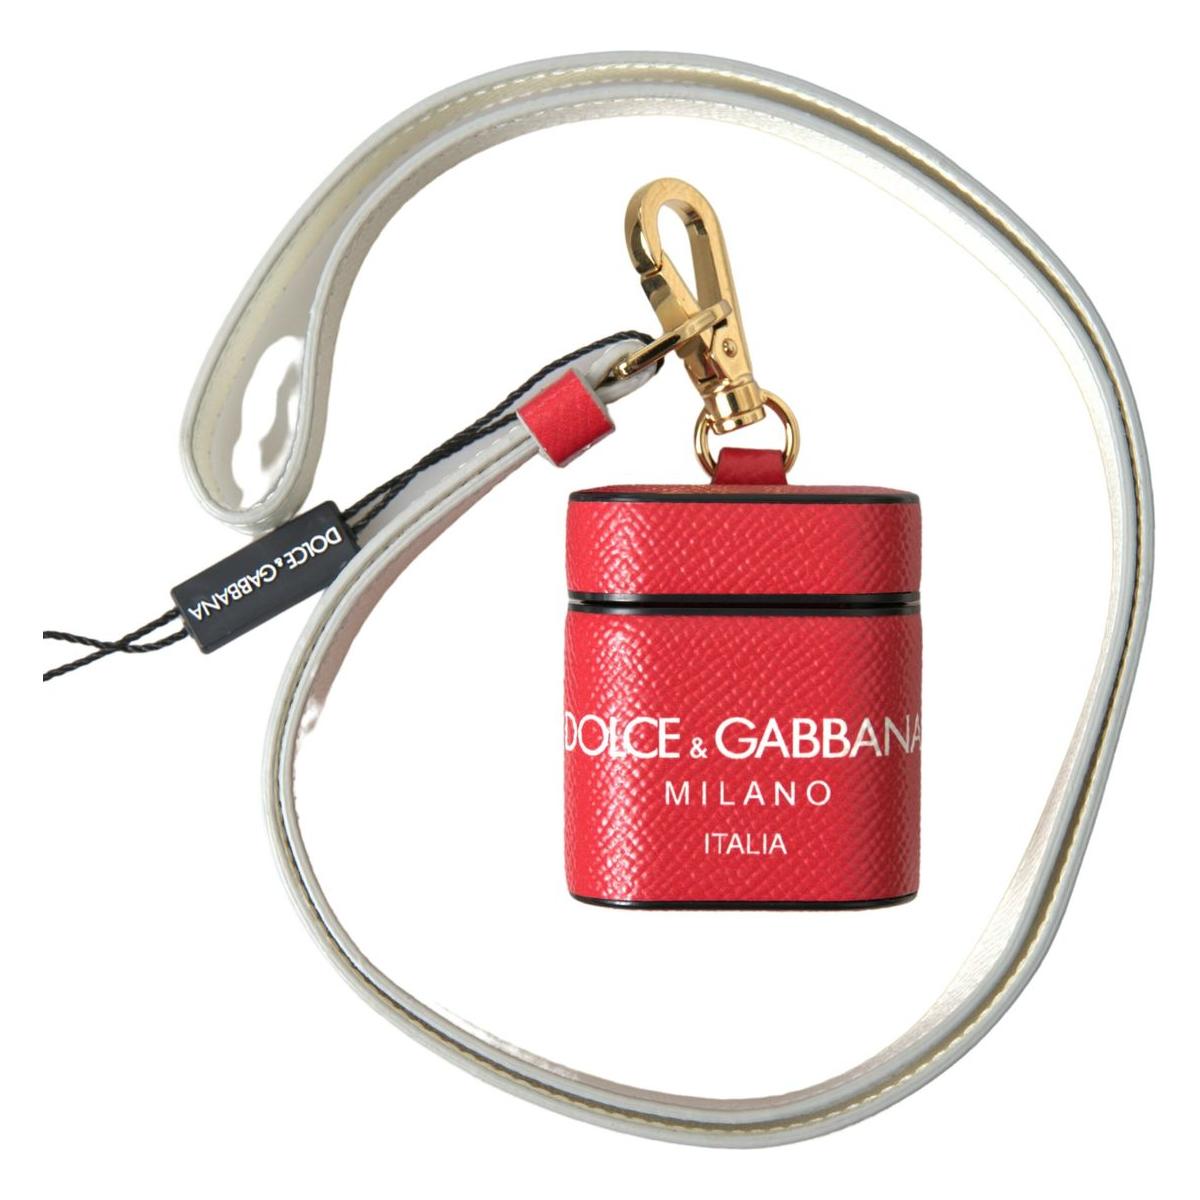 Dolce & Gabbana Elegant Red Leather Airpods Case red-leather-gold-tone-metal-logo-print-airpods-case